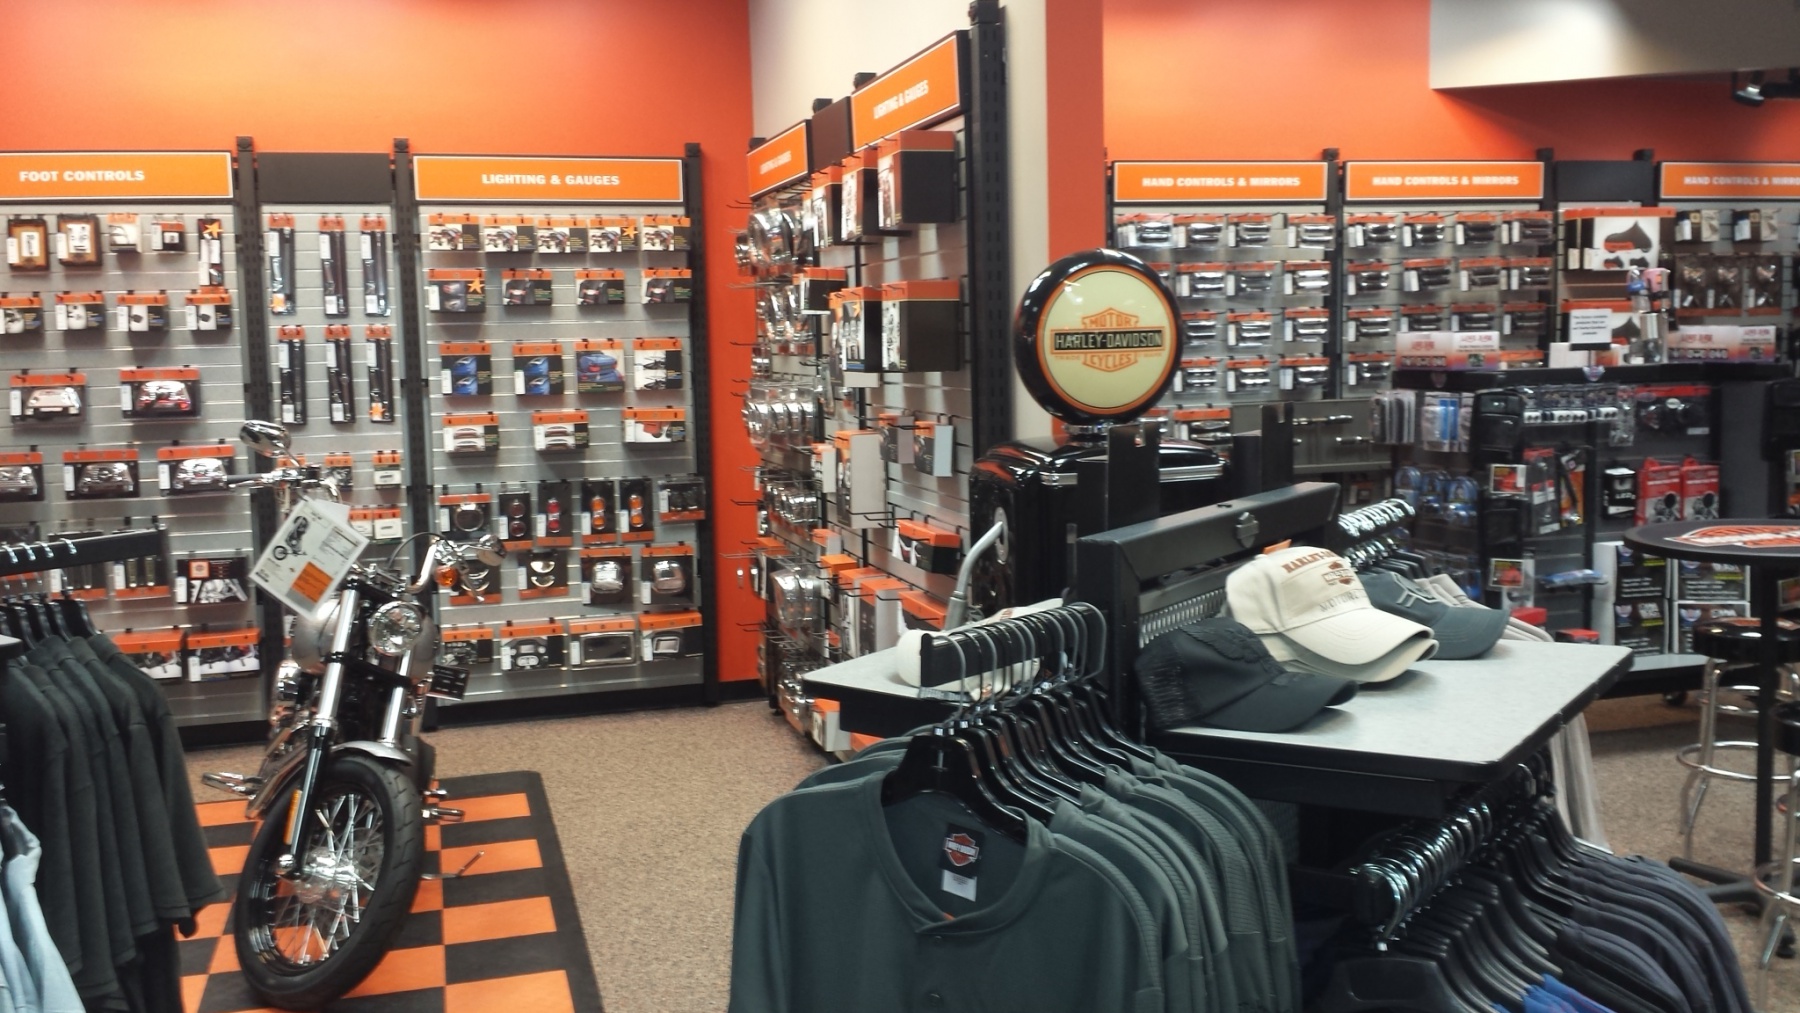 Nationwide Fixture Installations Inc Harley Davidson Case Study New Store Installation Millwork Packages Retail Rollouts Maintenance Program Management Signage Custom Installation Services